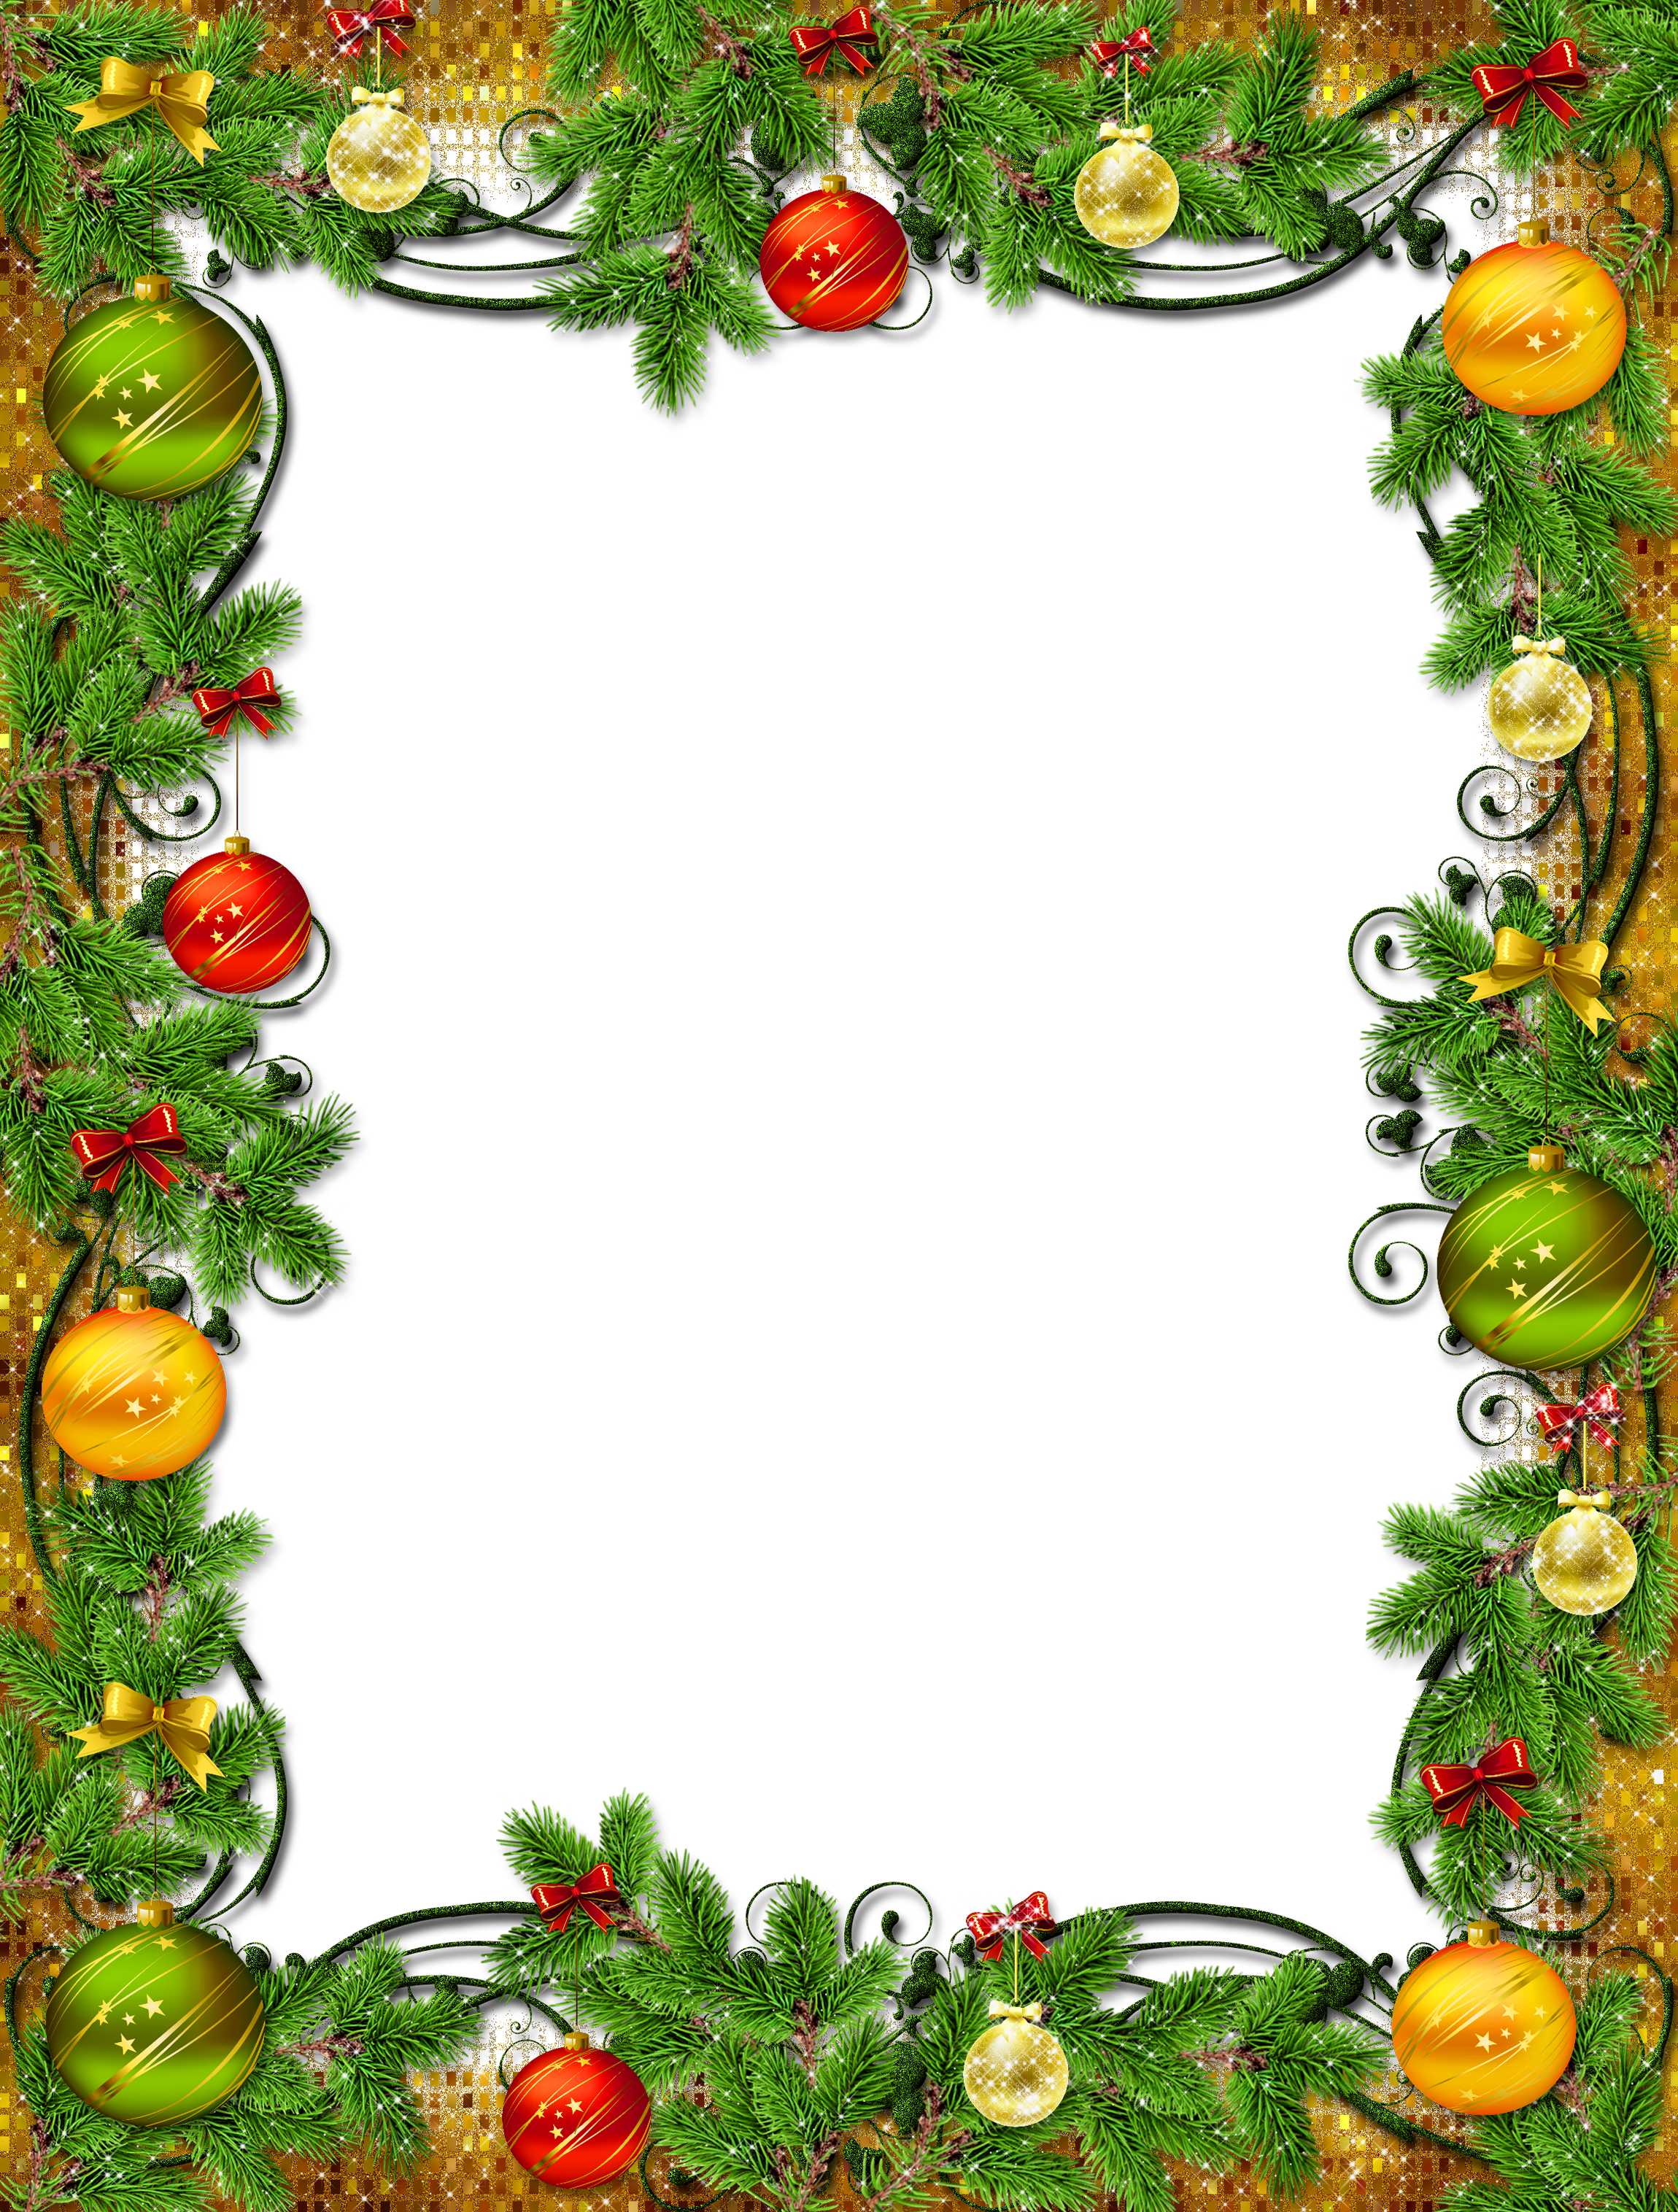 Beautiful photo gallery yopriceville. Christmas frame png